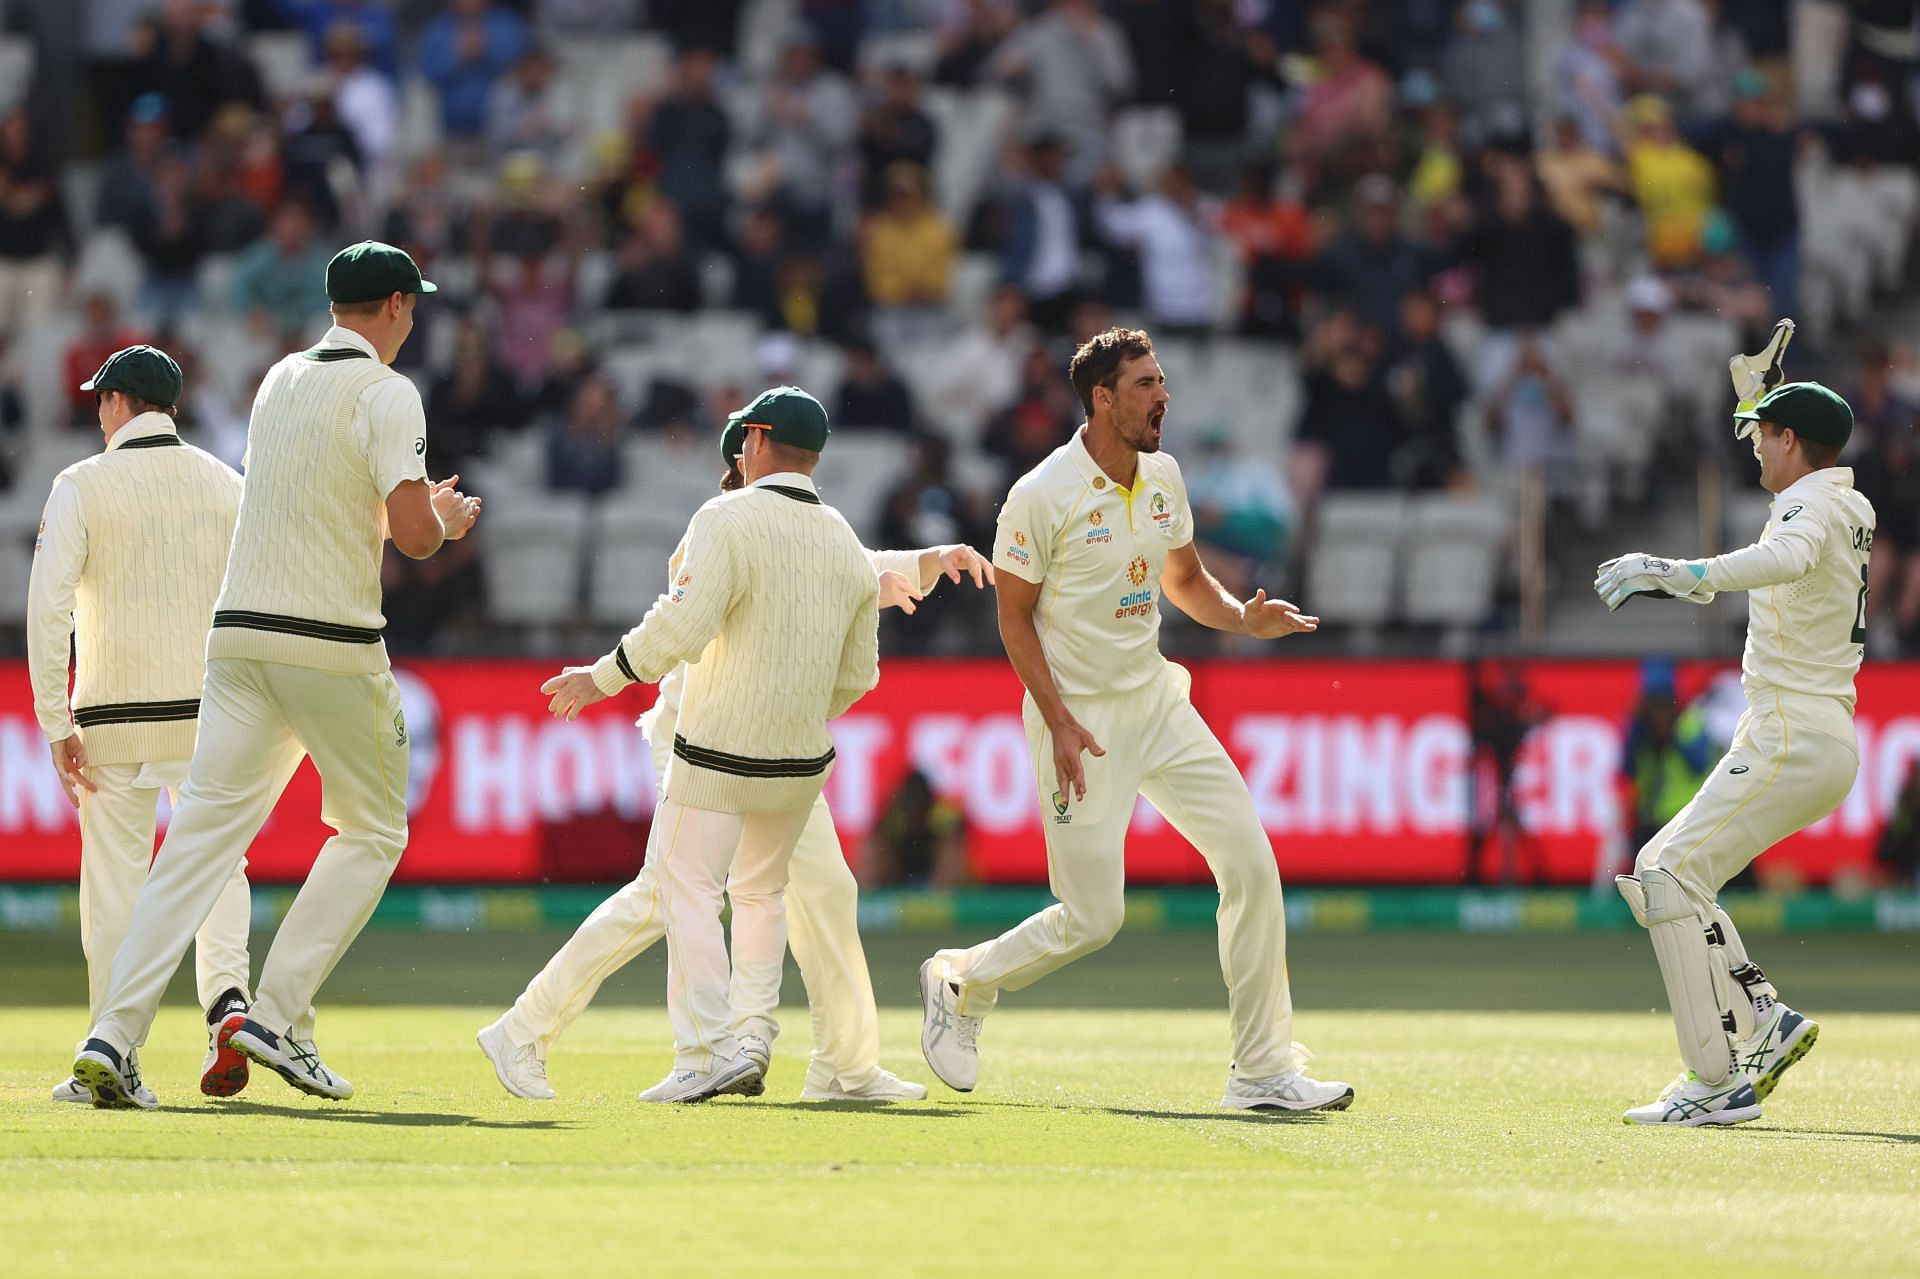 Mitchell Starc celebrates with teammates after dismissing Dawid Malan. Pic: Getty Images